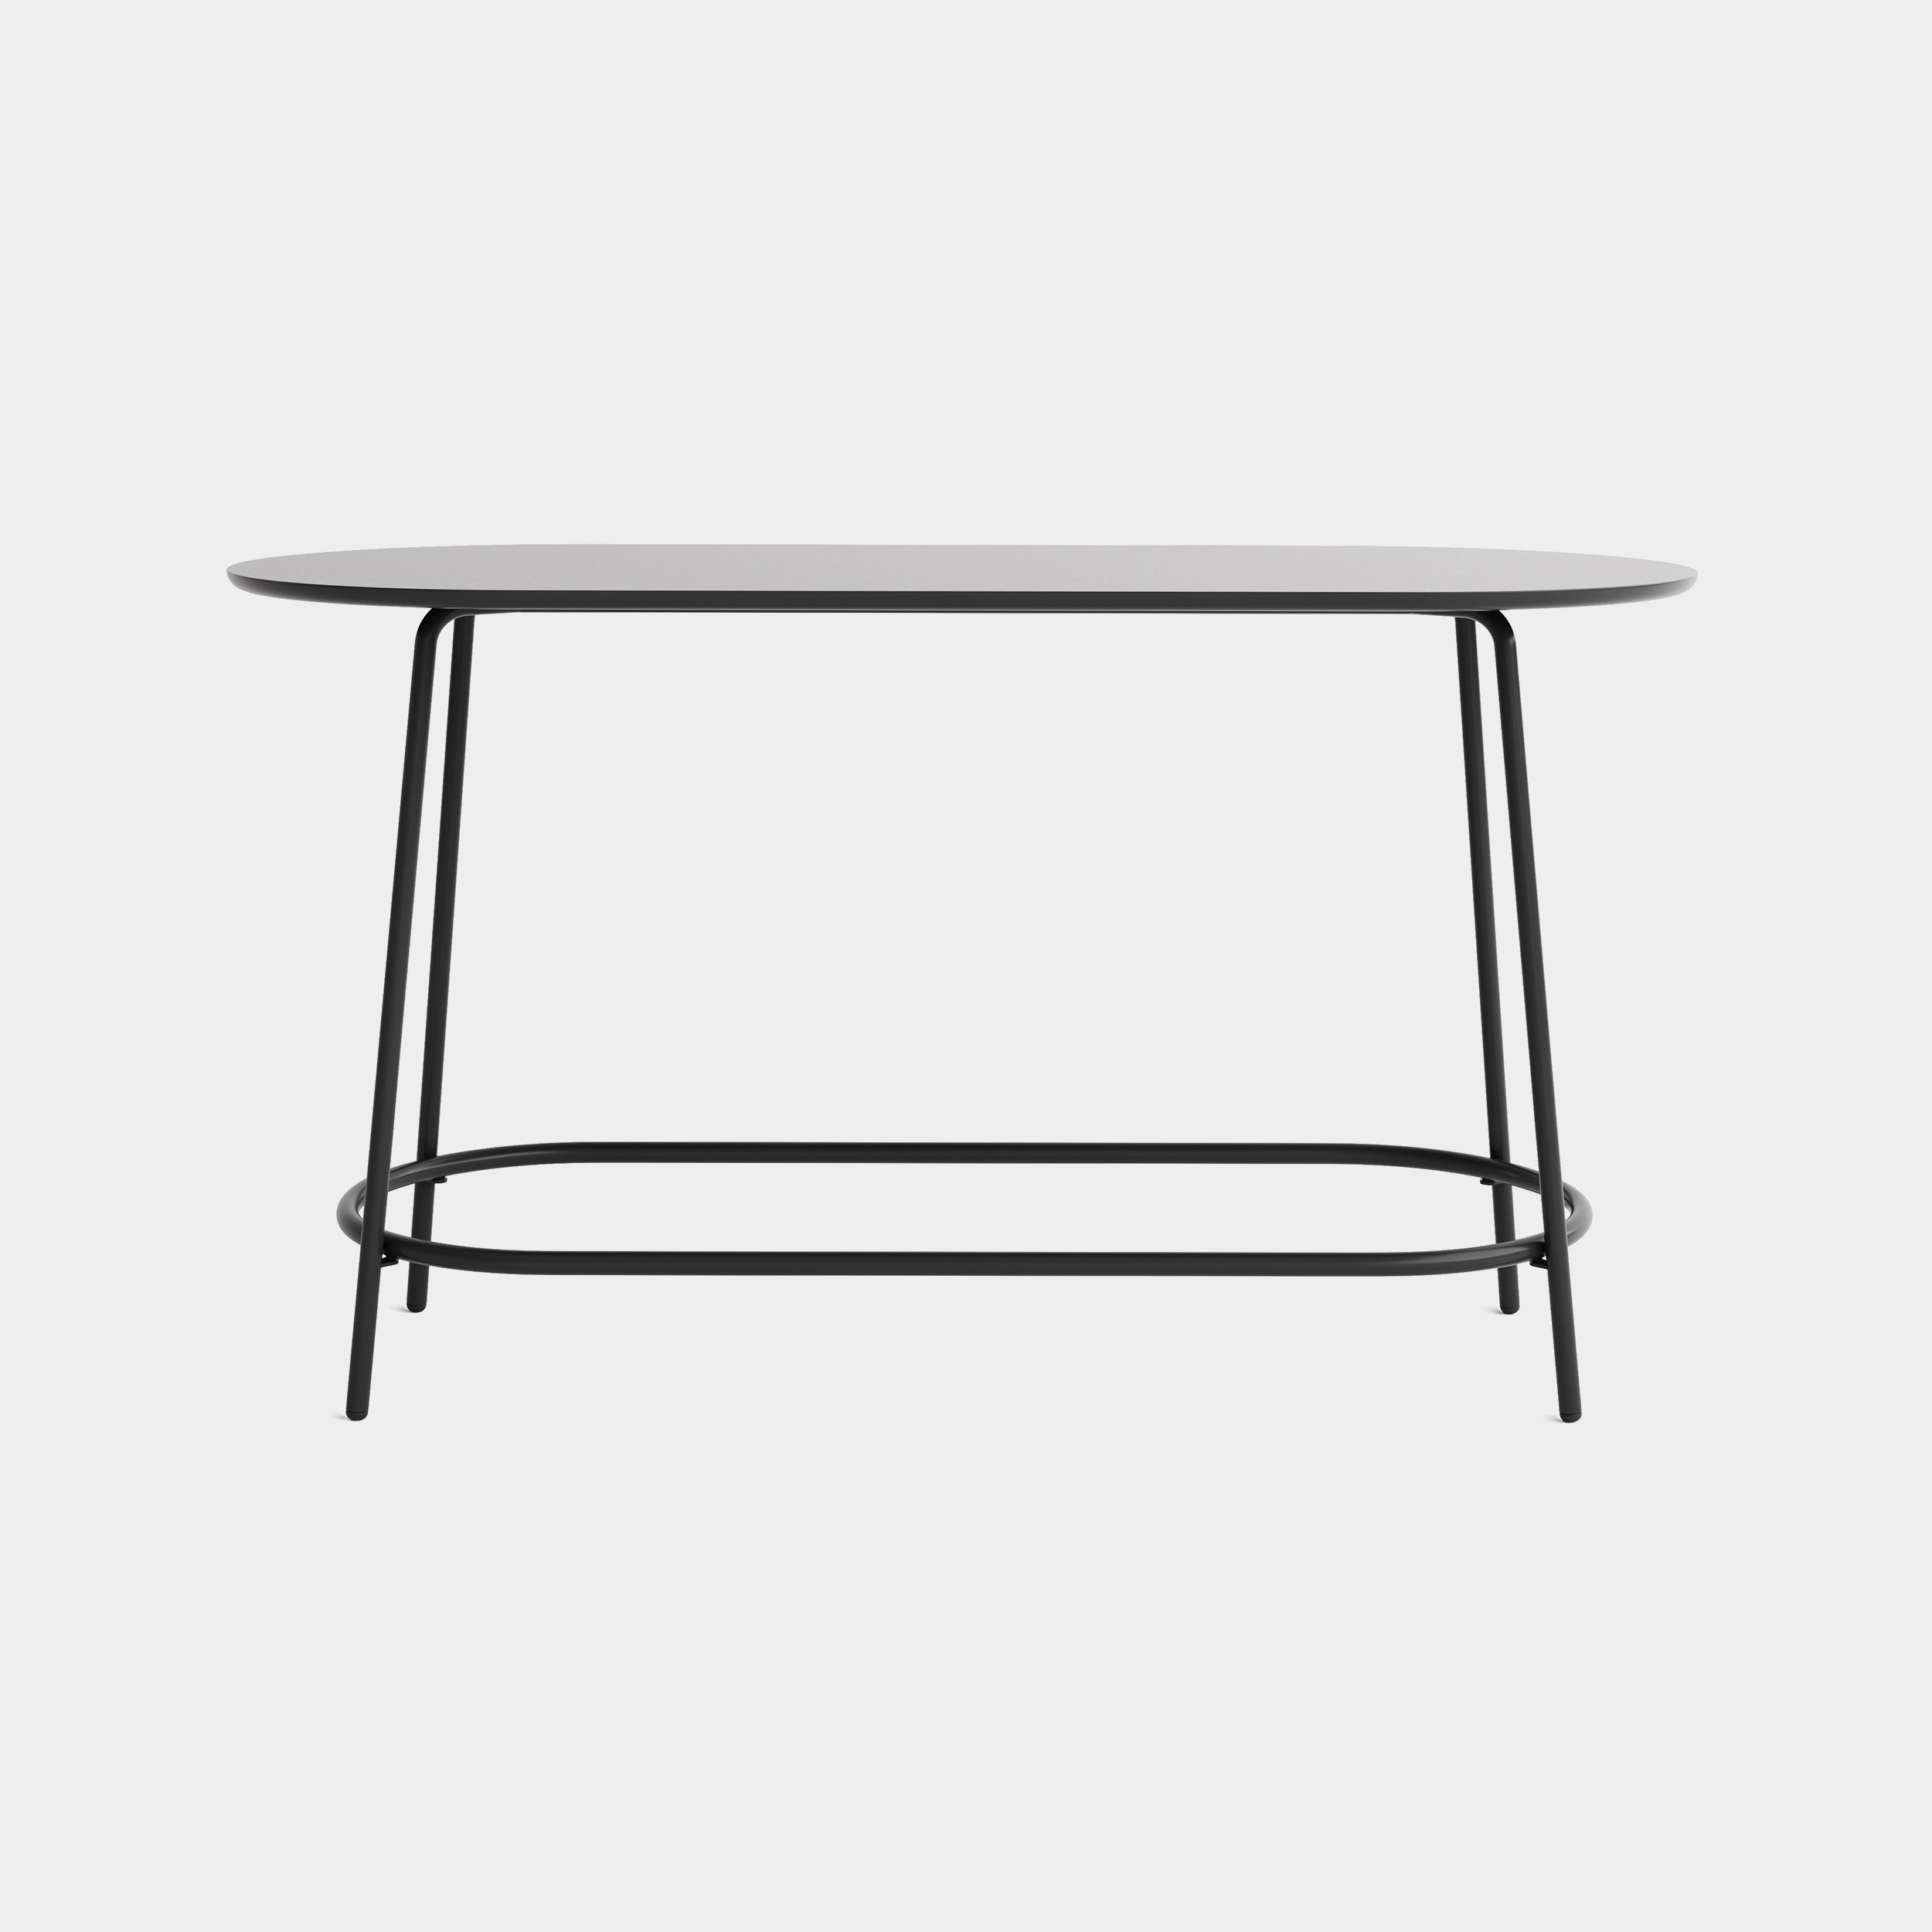 Special-T Plural Multi-Purpose Standard Height Table